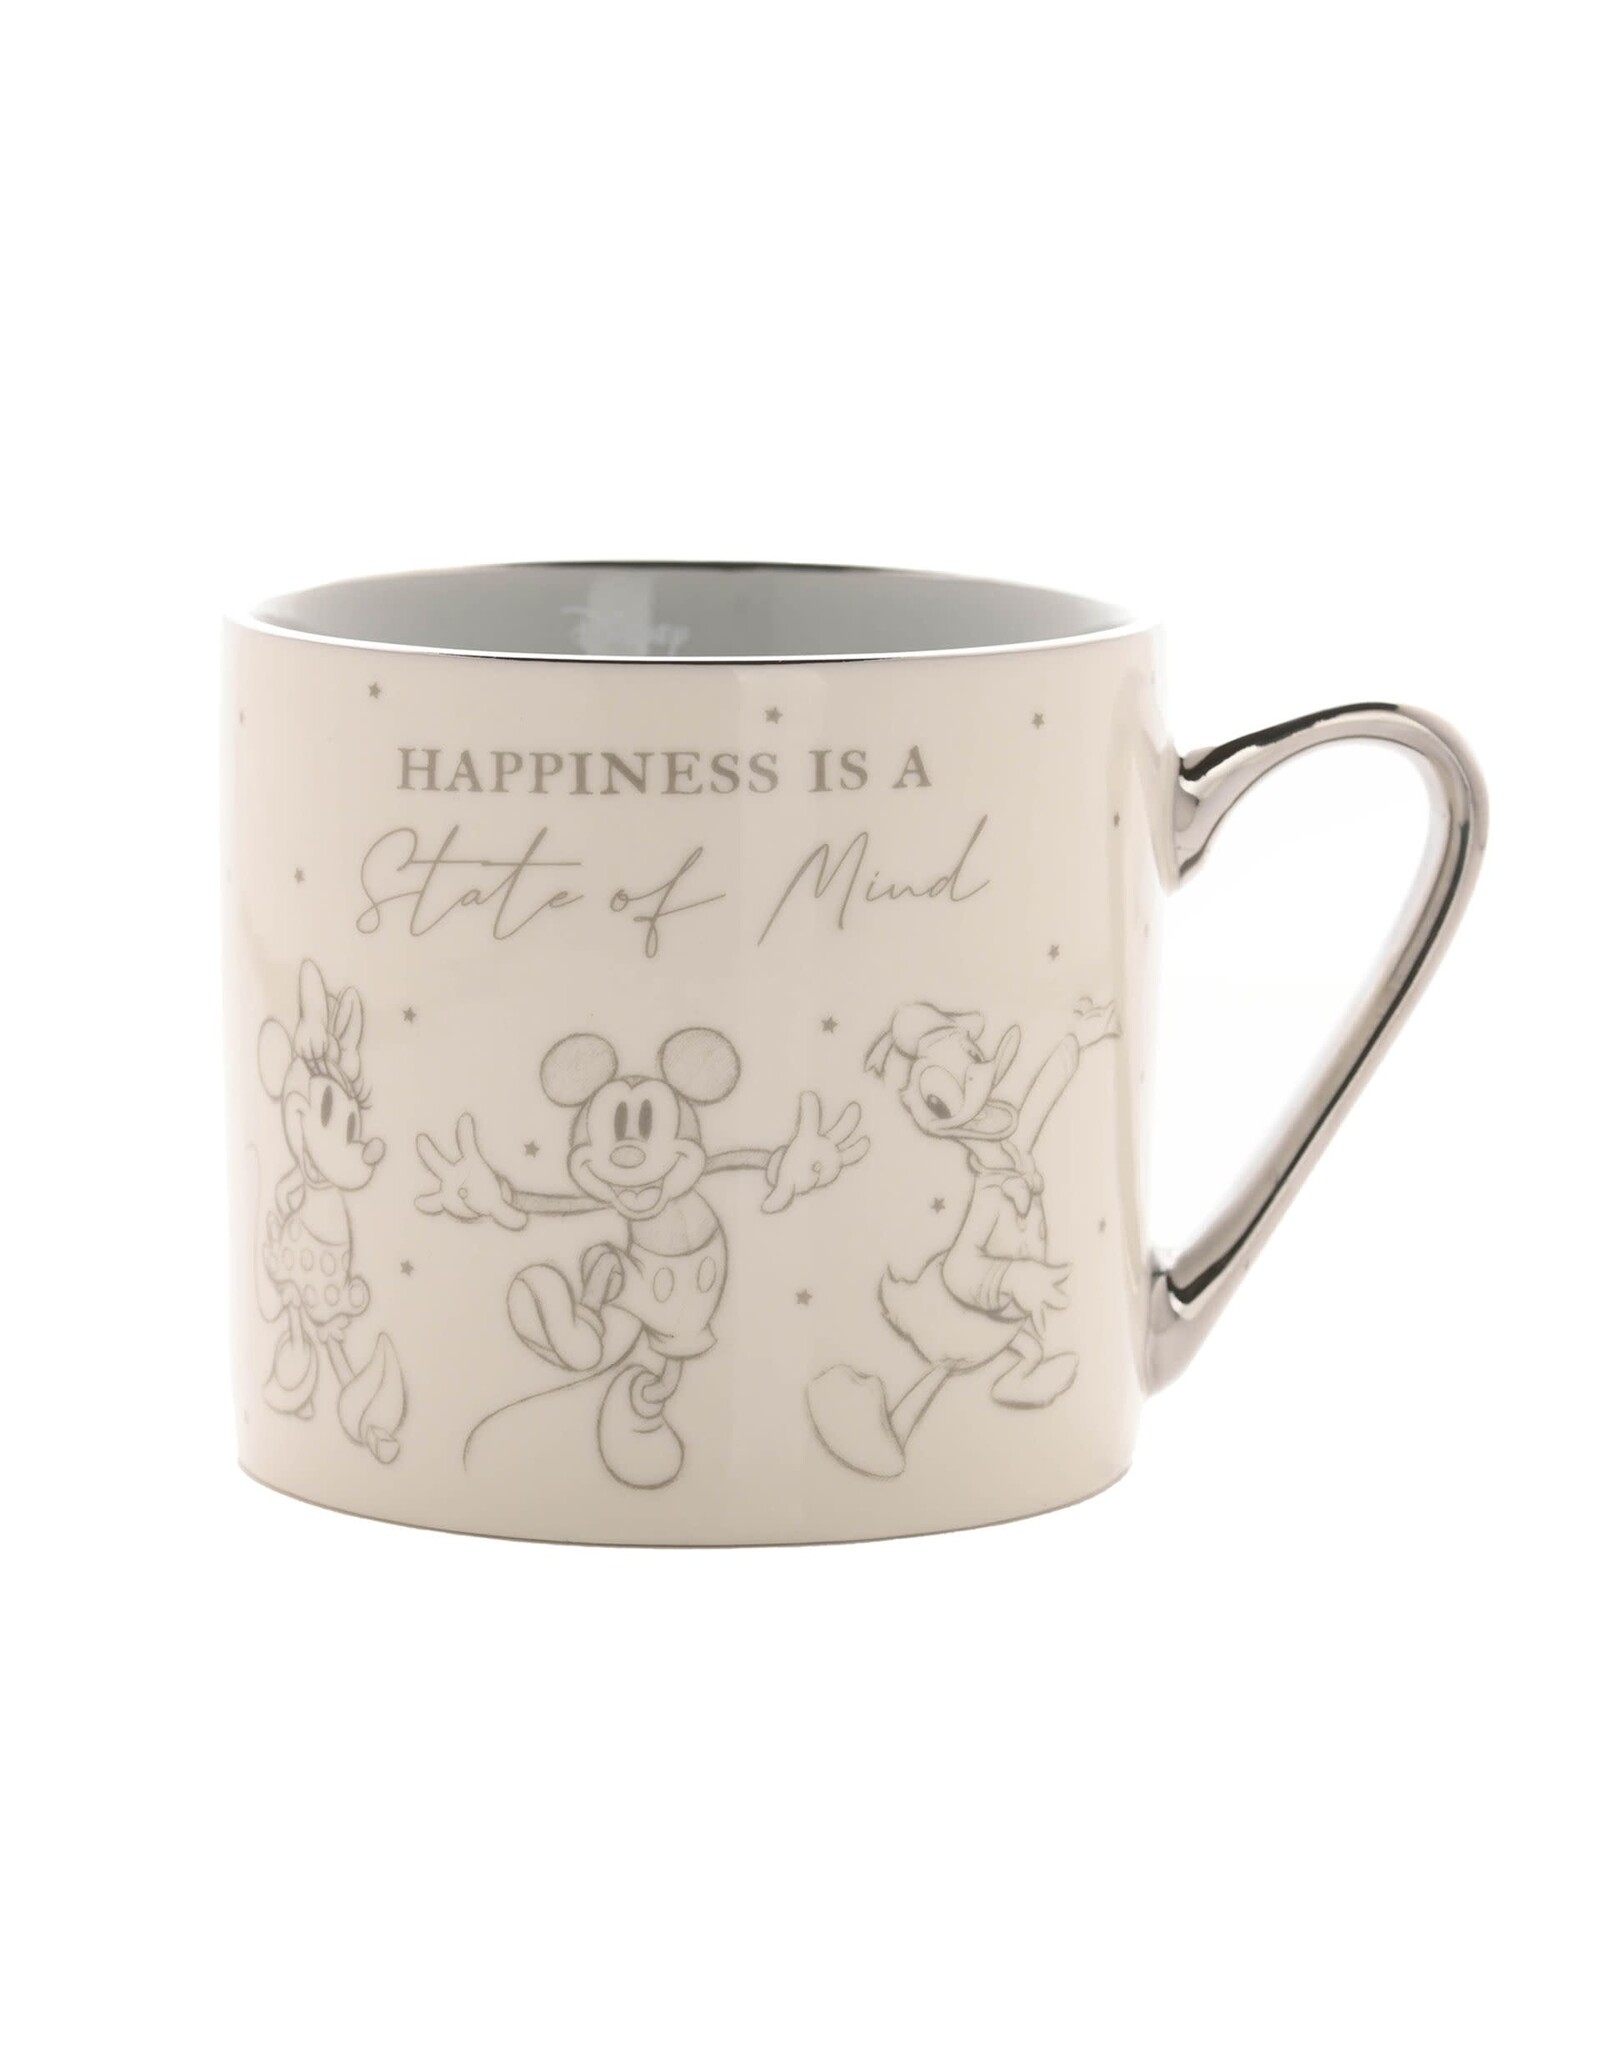 Disney Home Mok - Happiness is a State of Mind